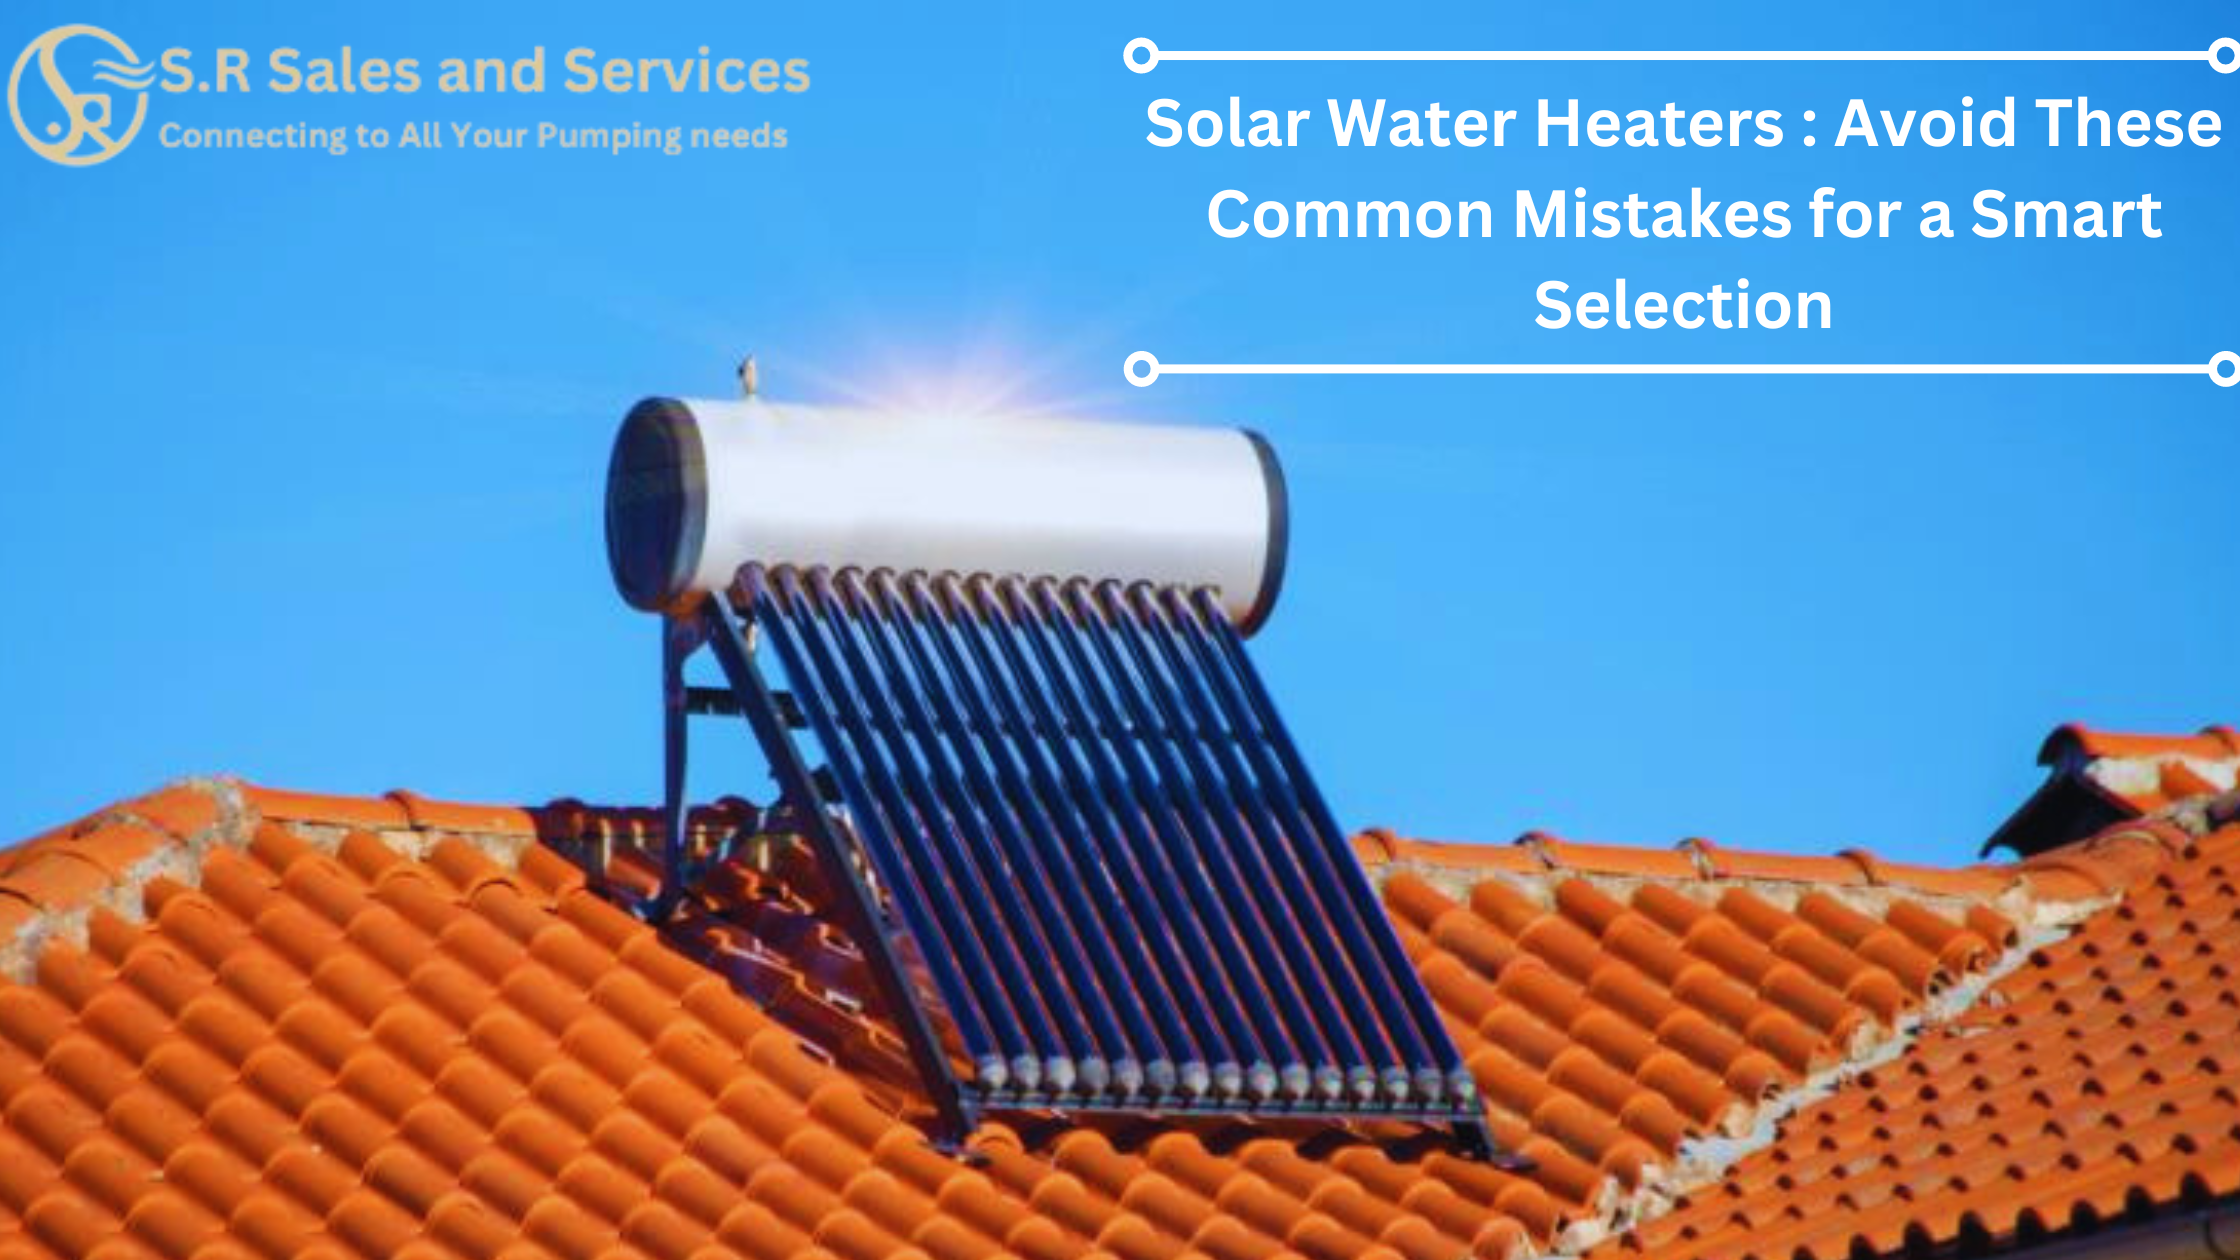 Solar Water Heaters : Avoid These Common Mistakes for a Smart Selection